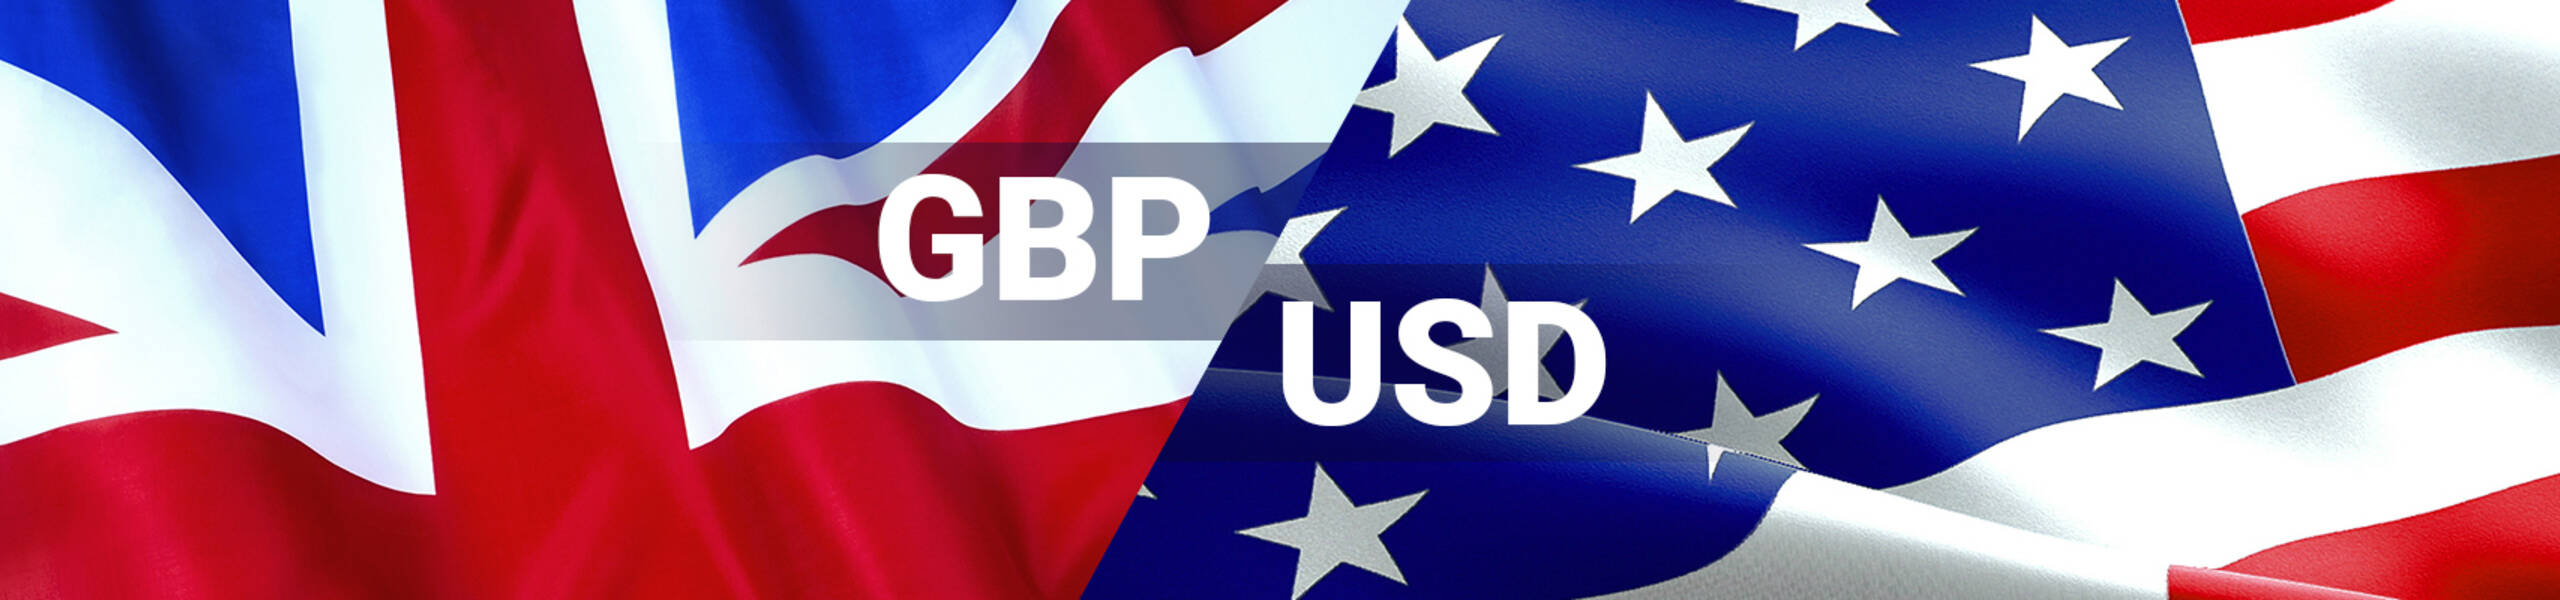 GBP/USD reached buy target 1.4000